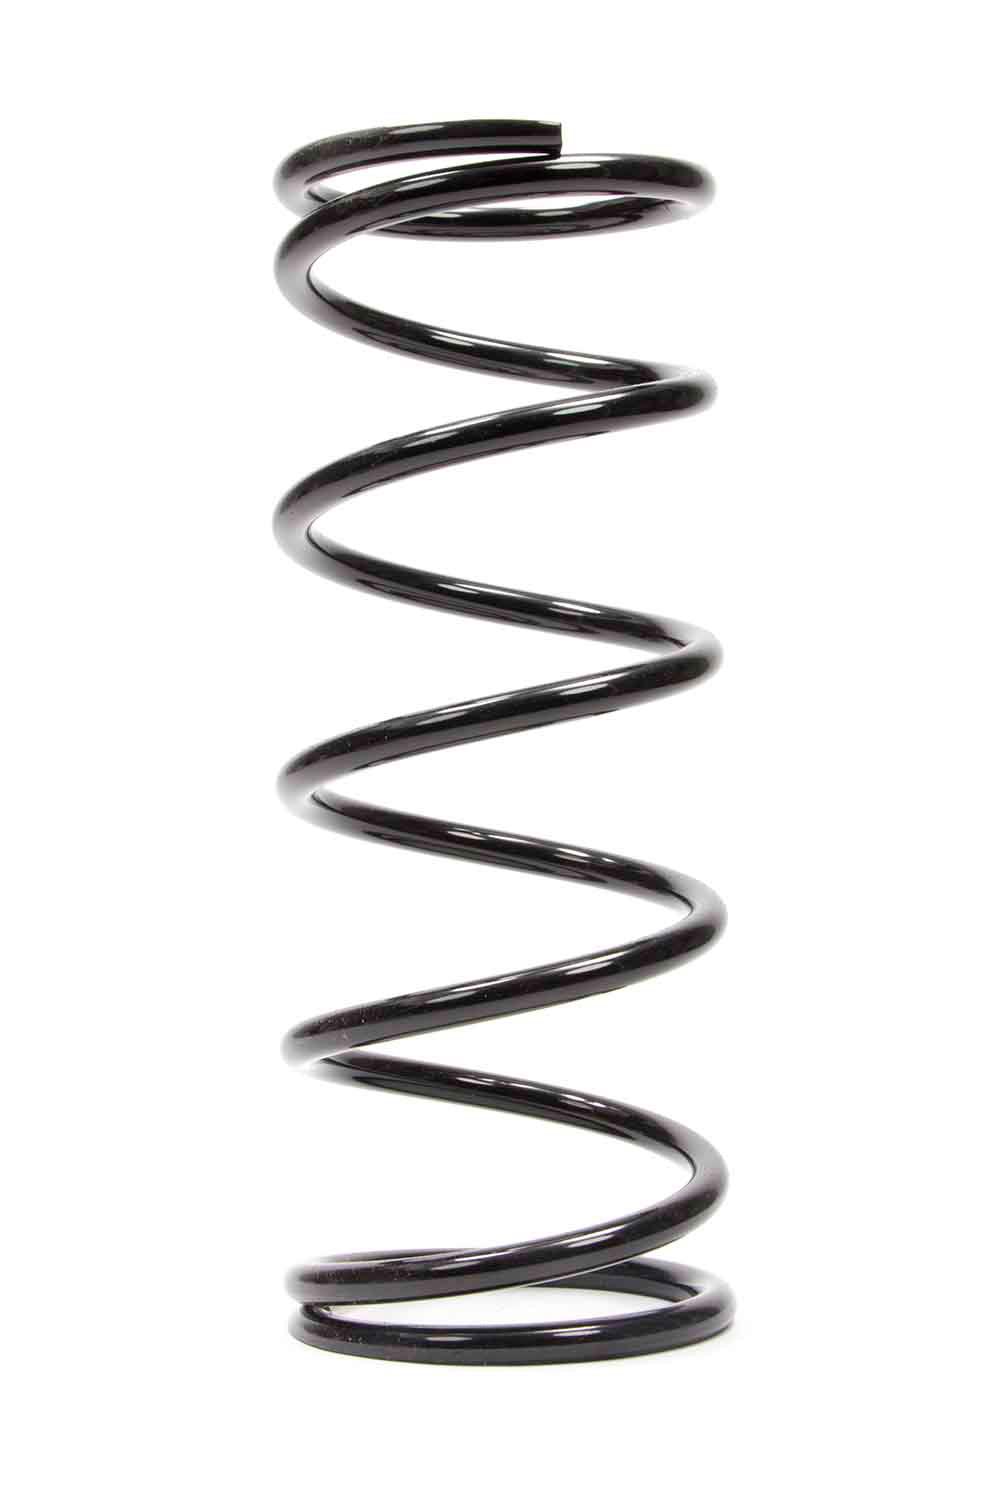 Conv Rear Spring 5in x 13in x 300 - Burlile Performance Products